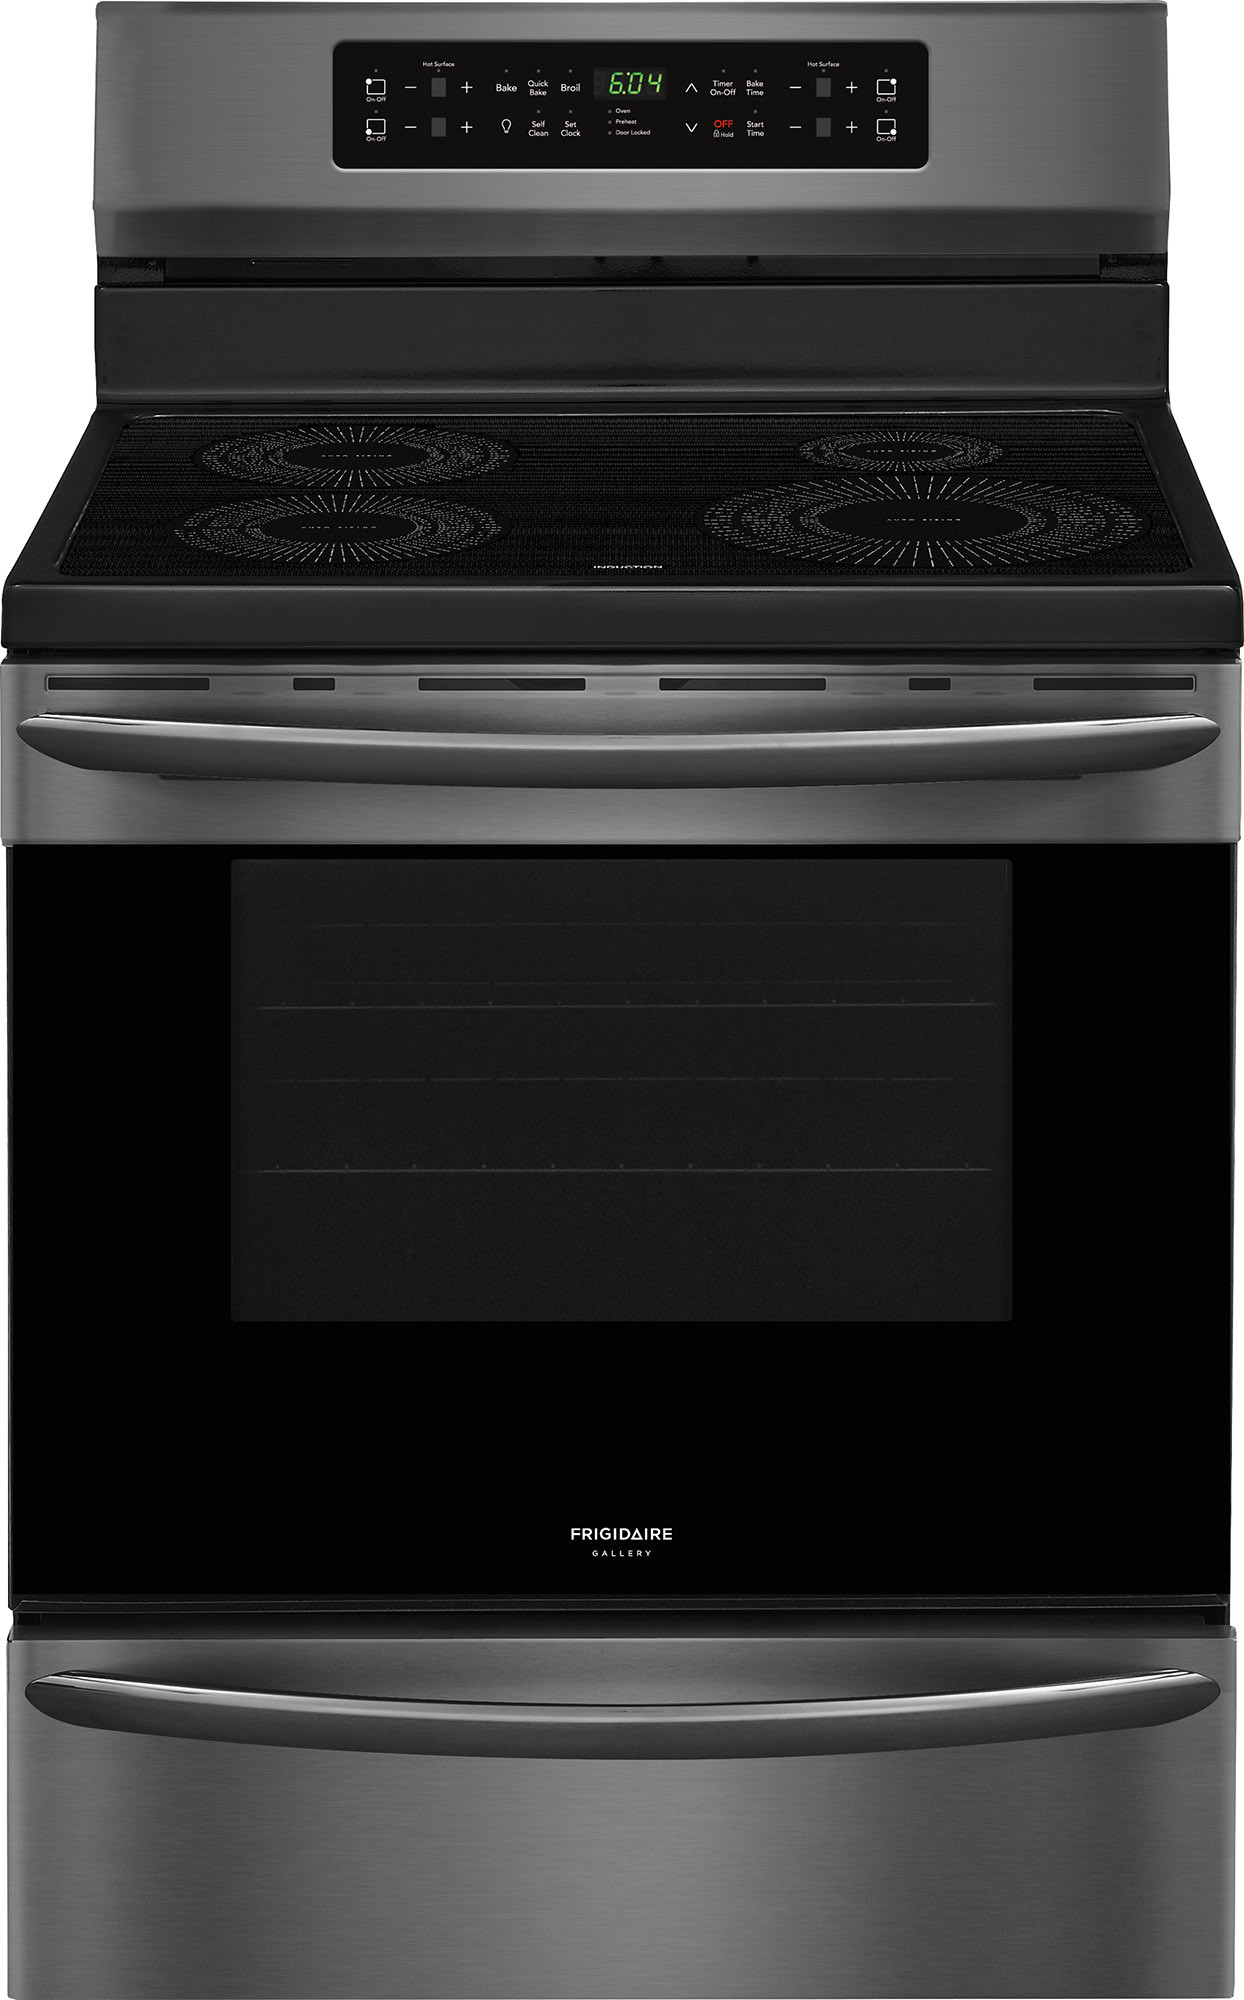 What Does Hold Mean on Frigidaire Oven? 